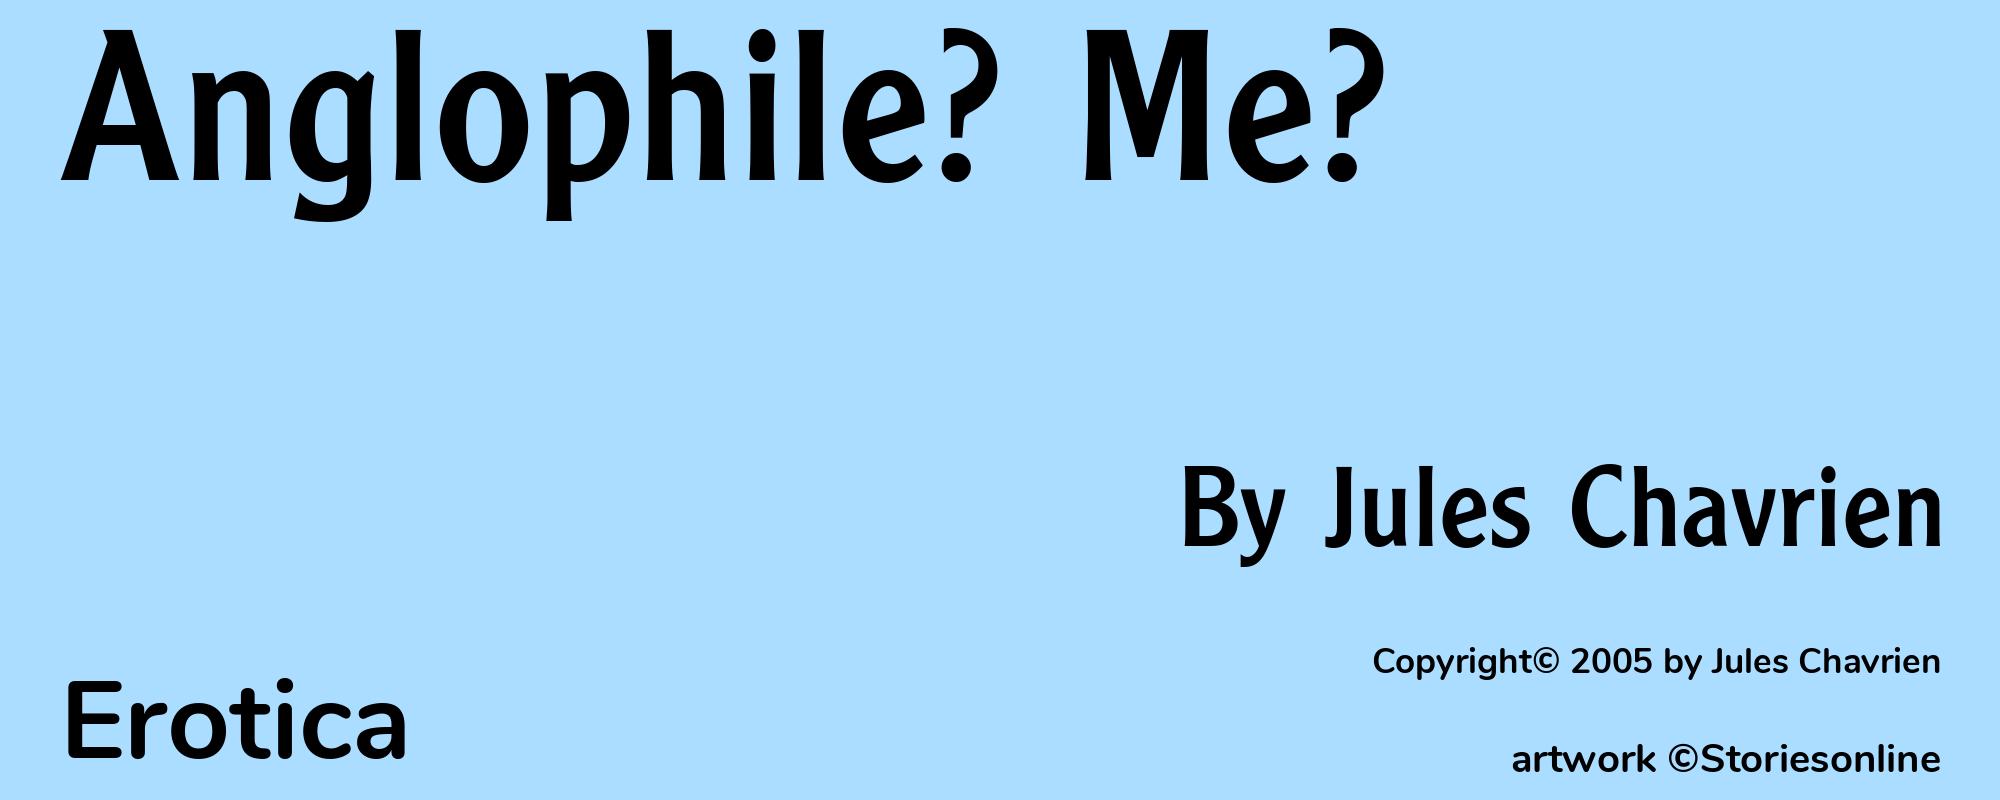 Anglophile? Me? - Cover